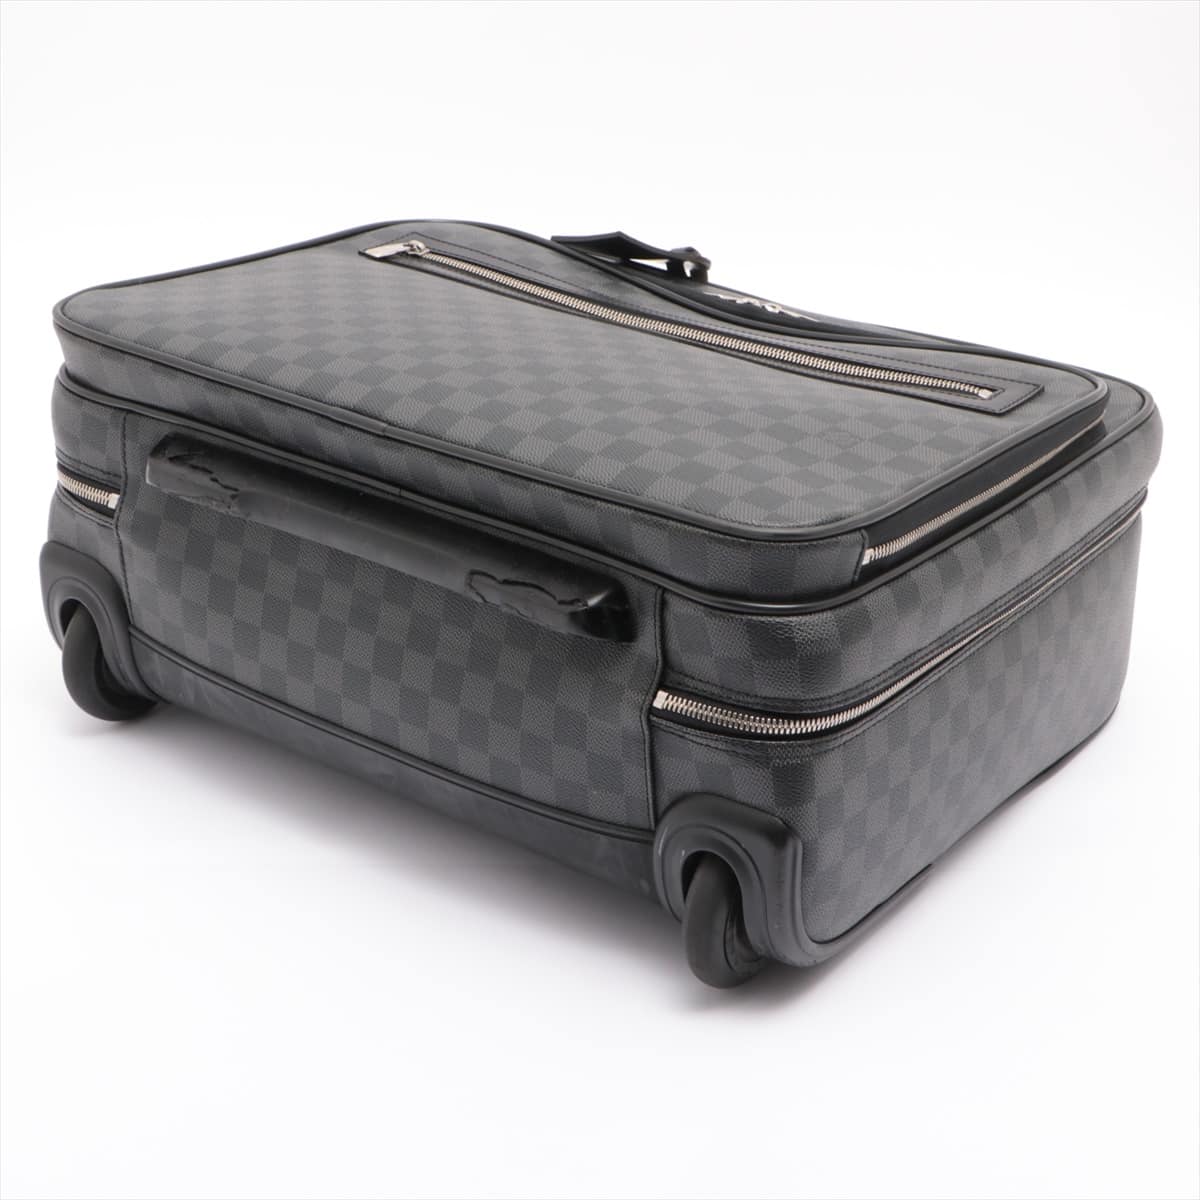 Louis Vuitton Damier graphite Pilot Case N23206 MB2160 Name tag with initials